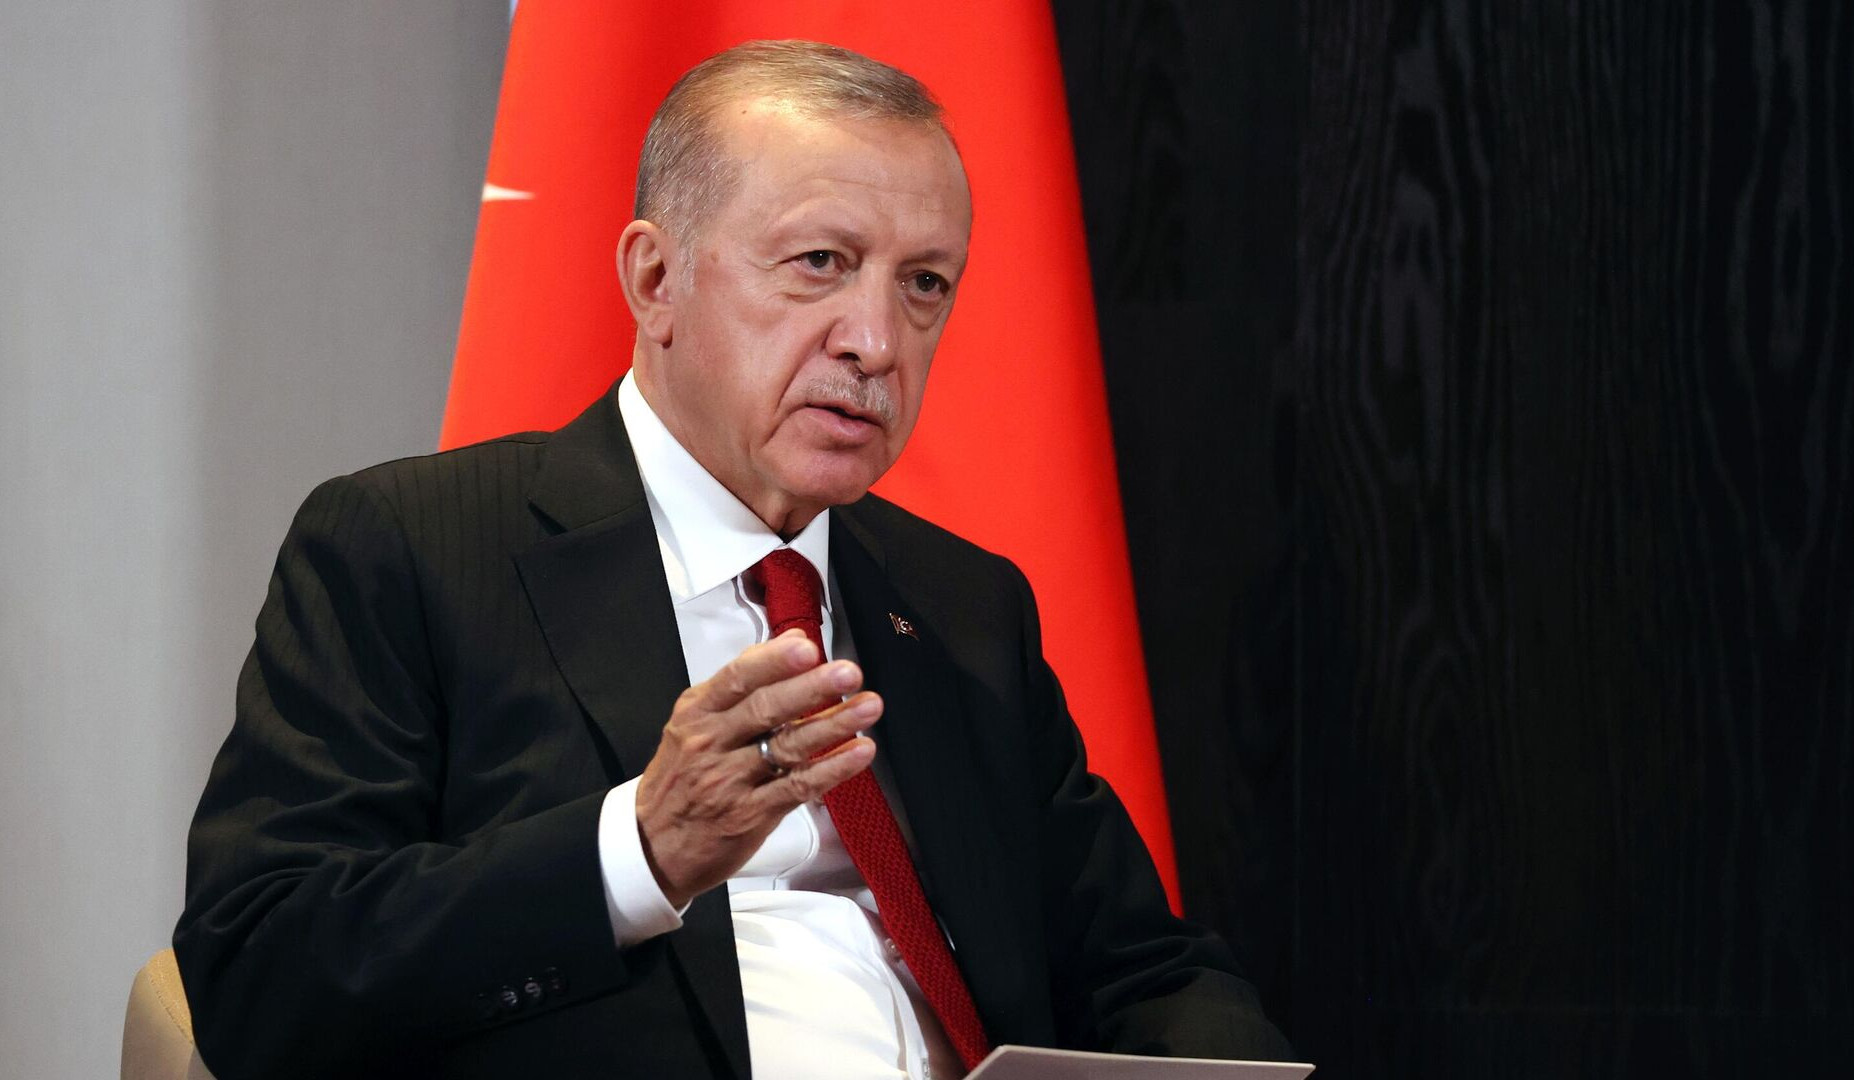 Erdogan warned that he will not allow opposition to attack Russia, Putin and ignore Azerbaijan